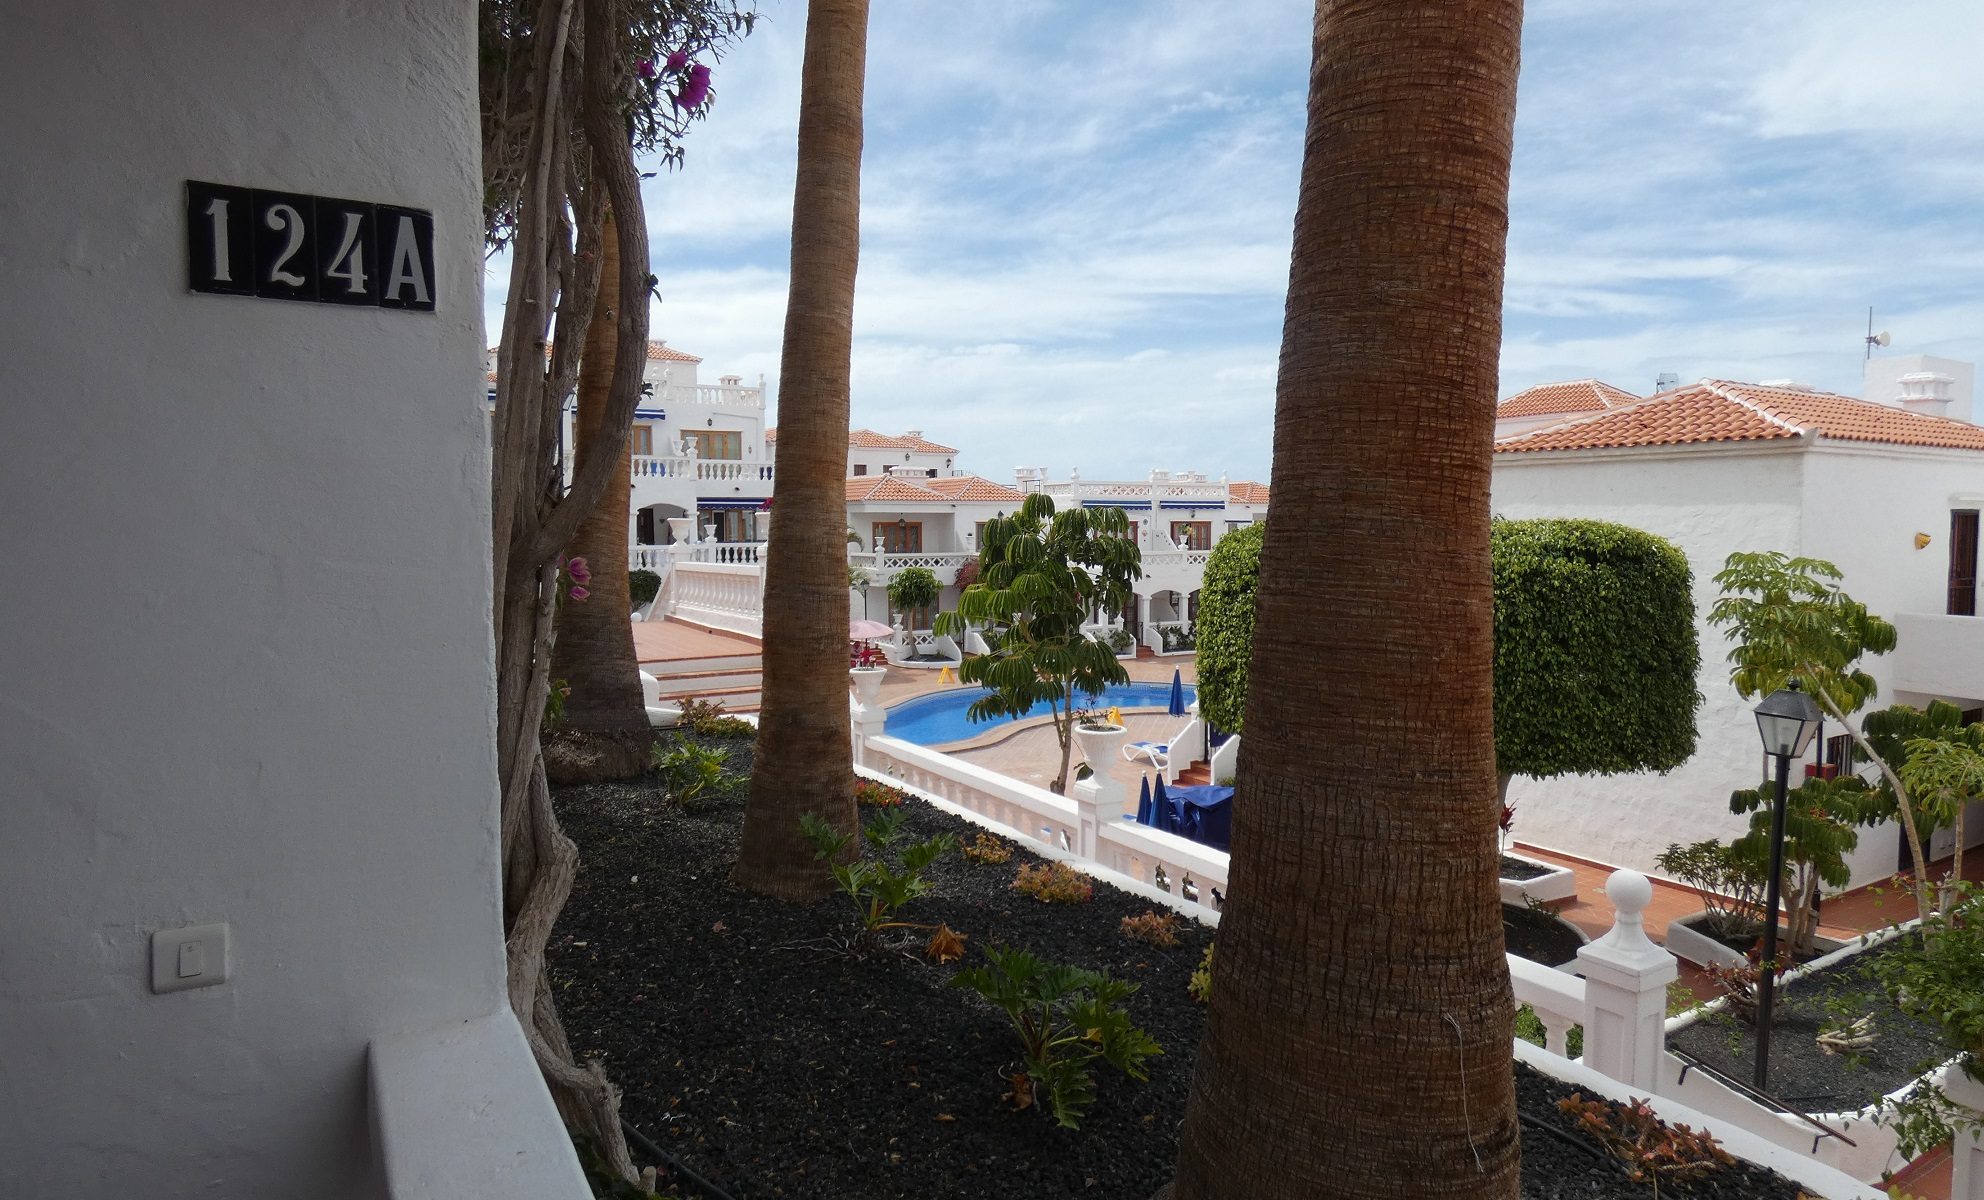 holiday-apartments-tenerife-124A-view